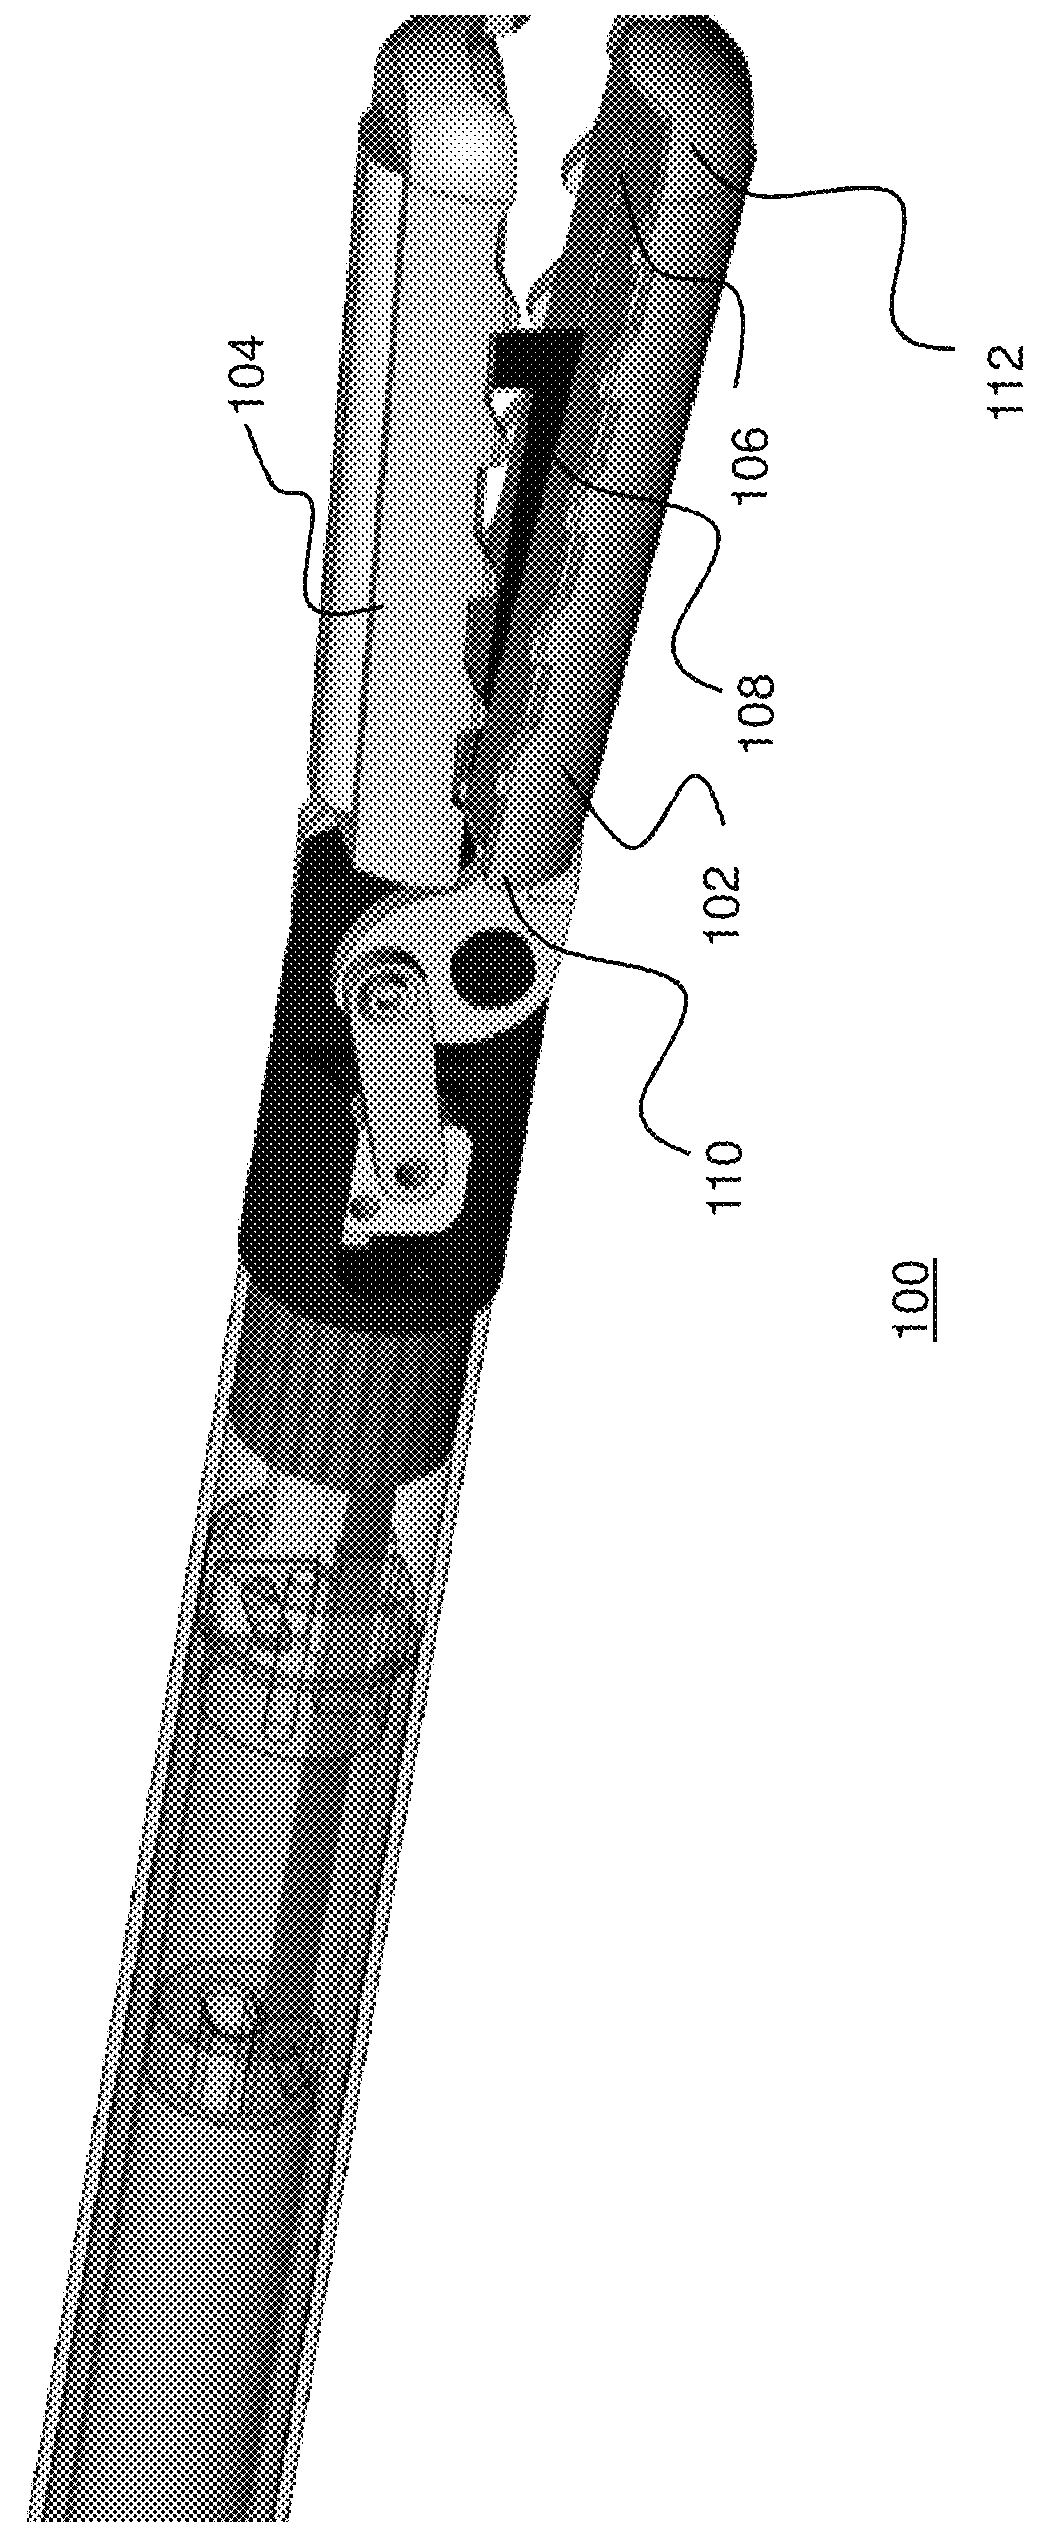 Medical ultrasonic cauterization and cutting device and method